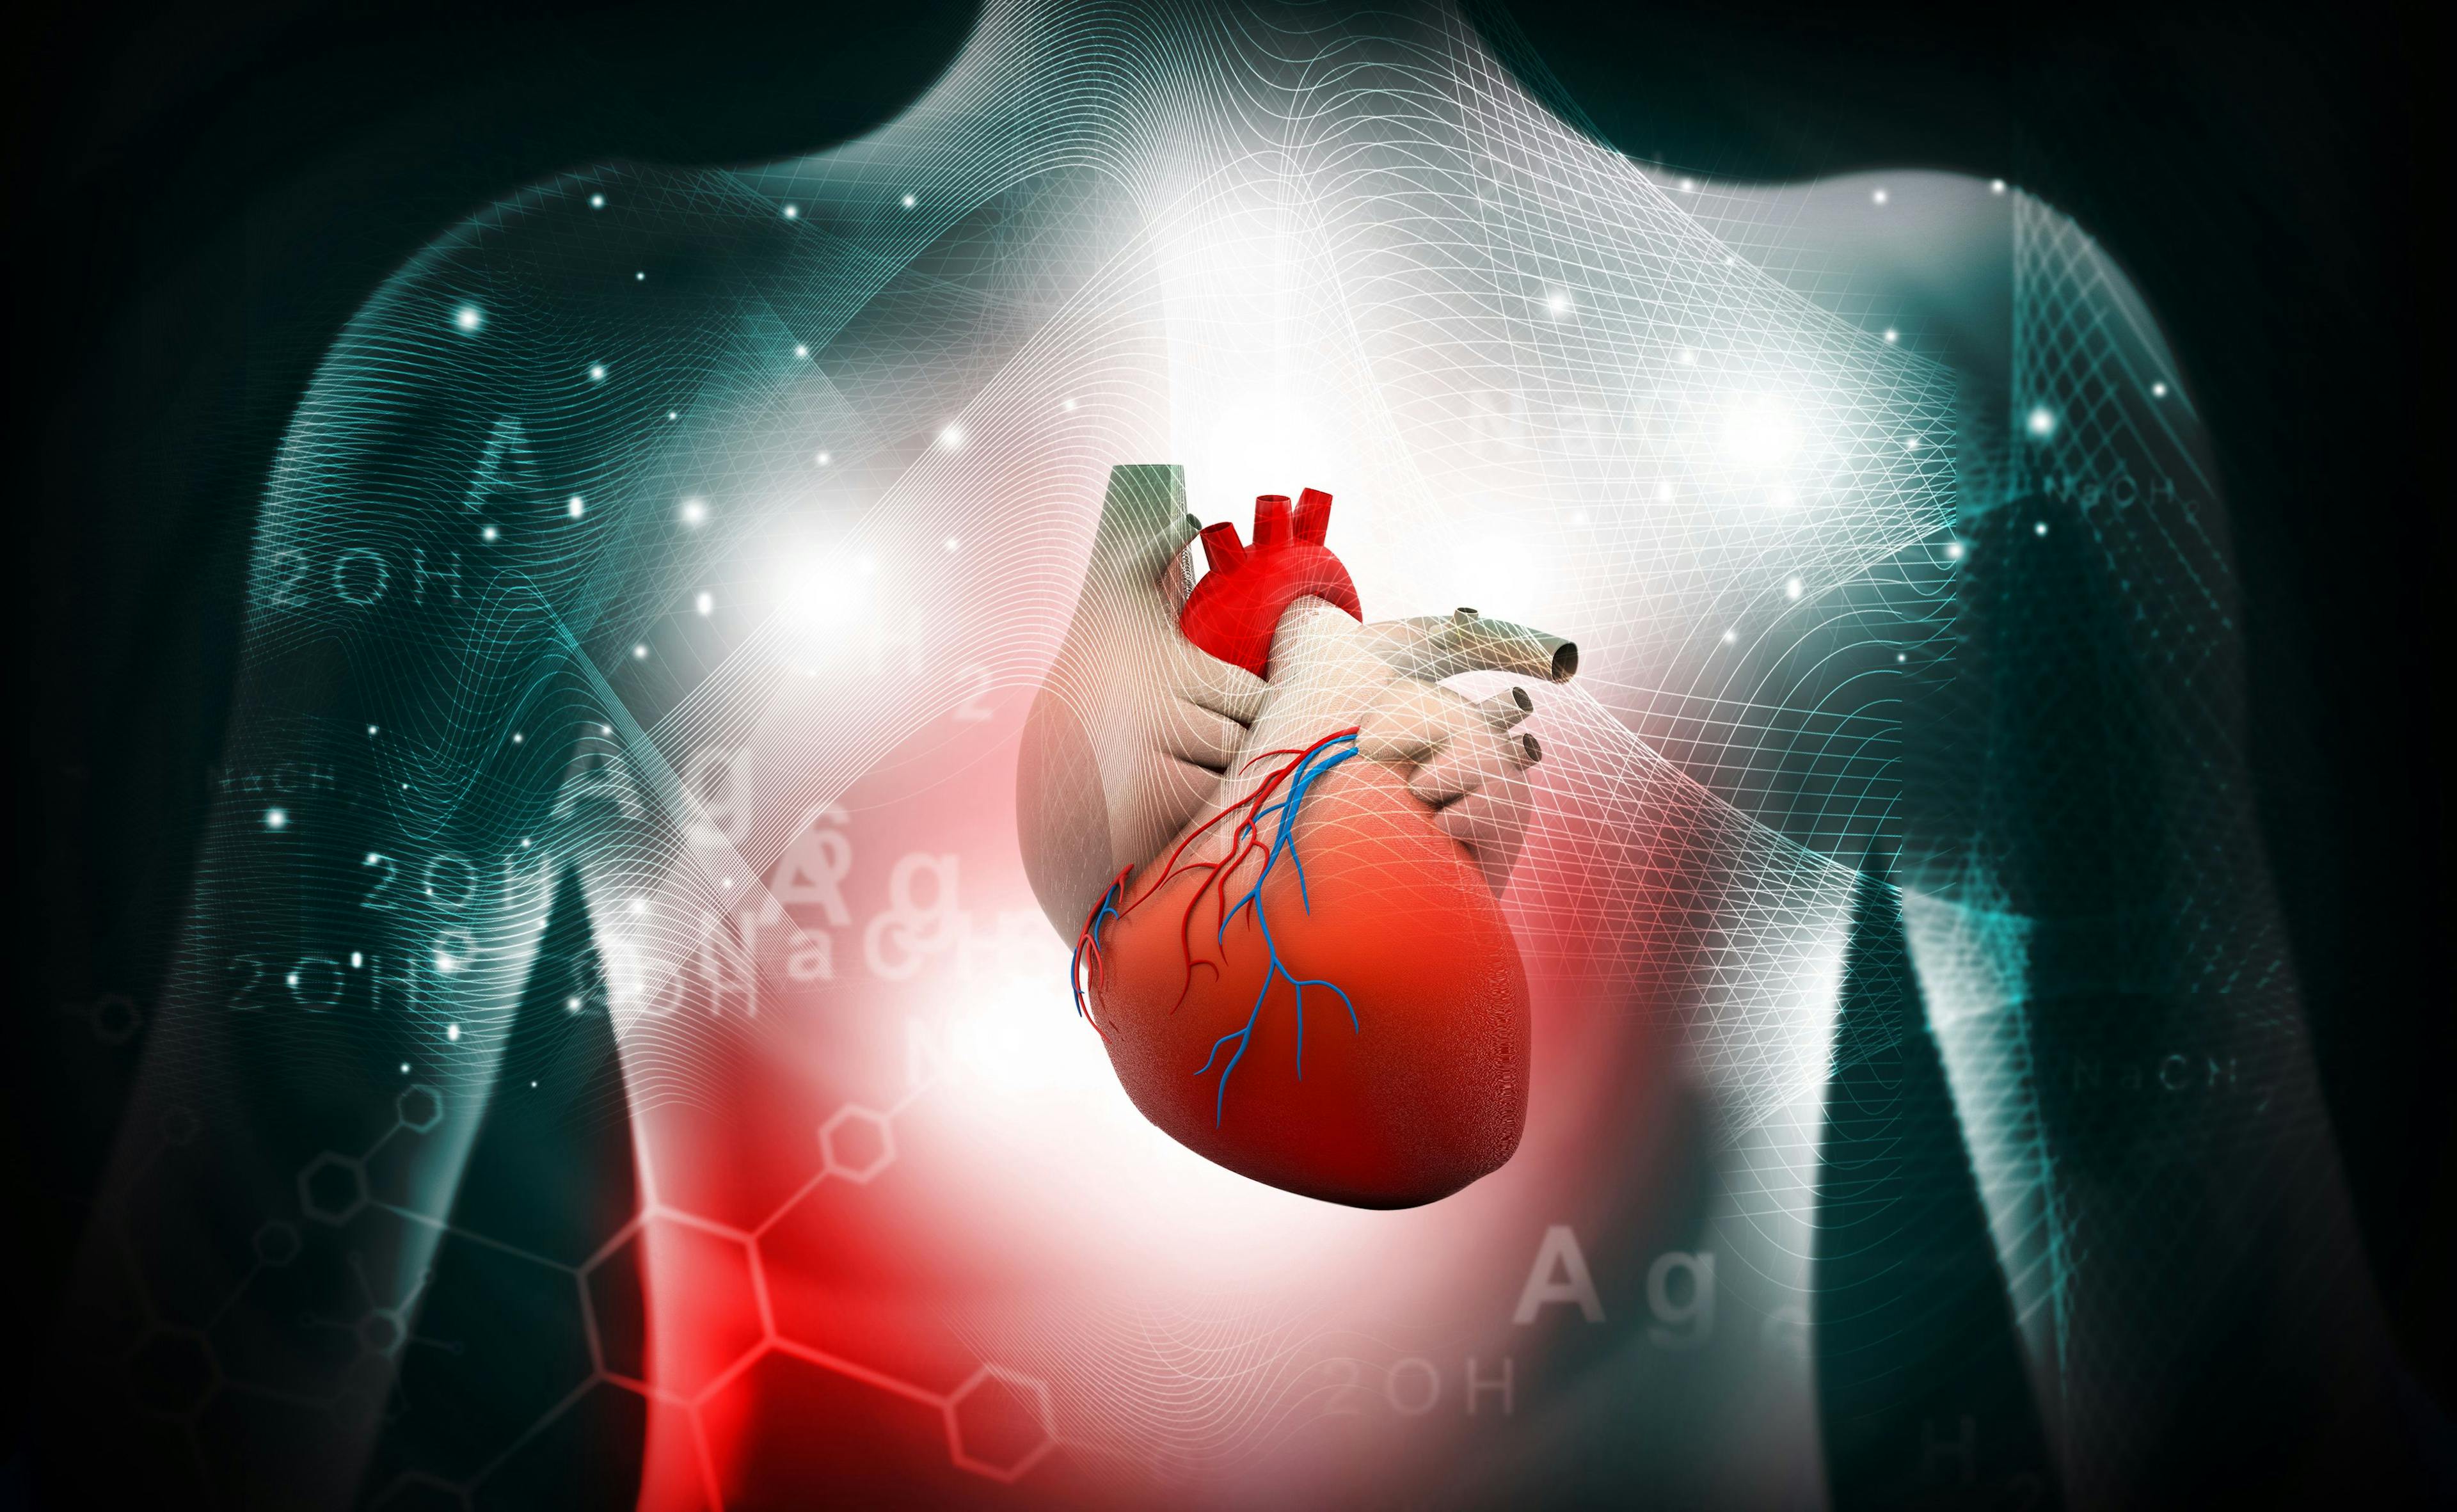 Test for Early Detection of Heart Problems Reduces Cardiotoxicity Risk From Chemotherapy